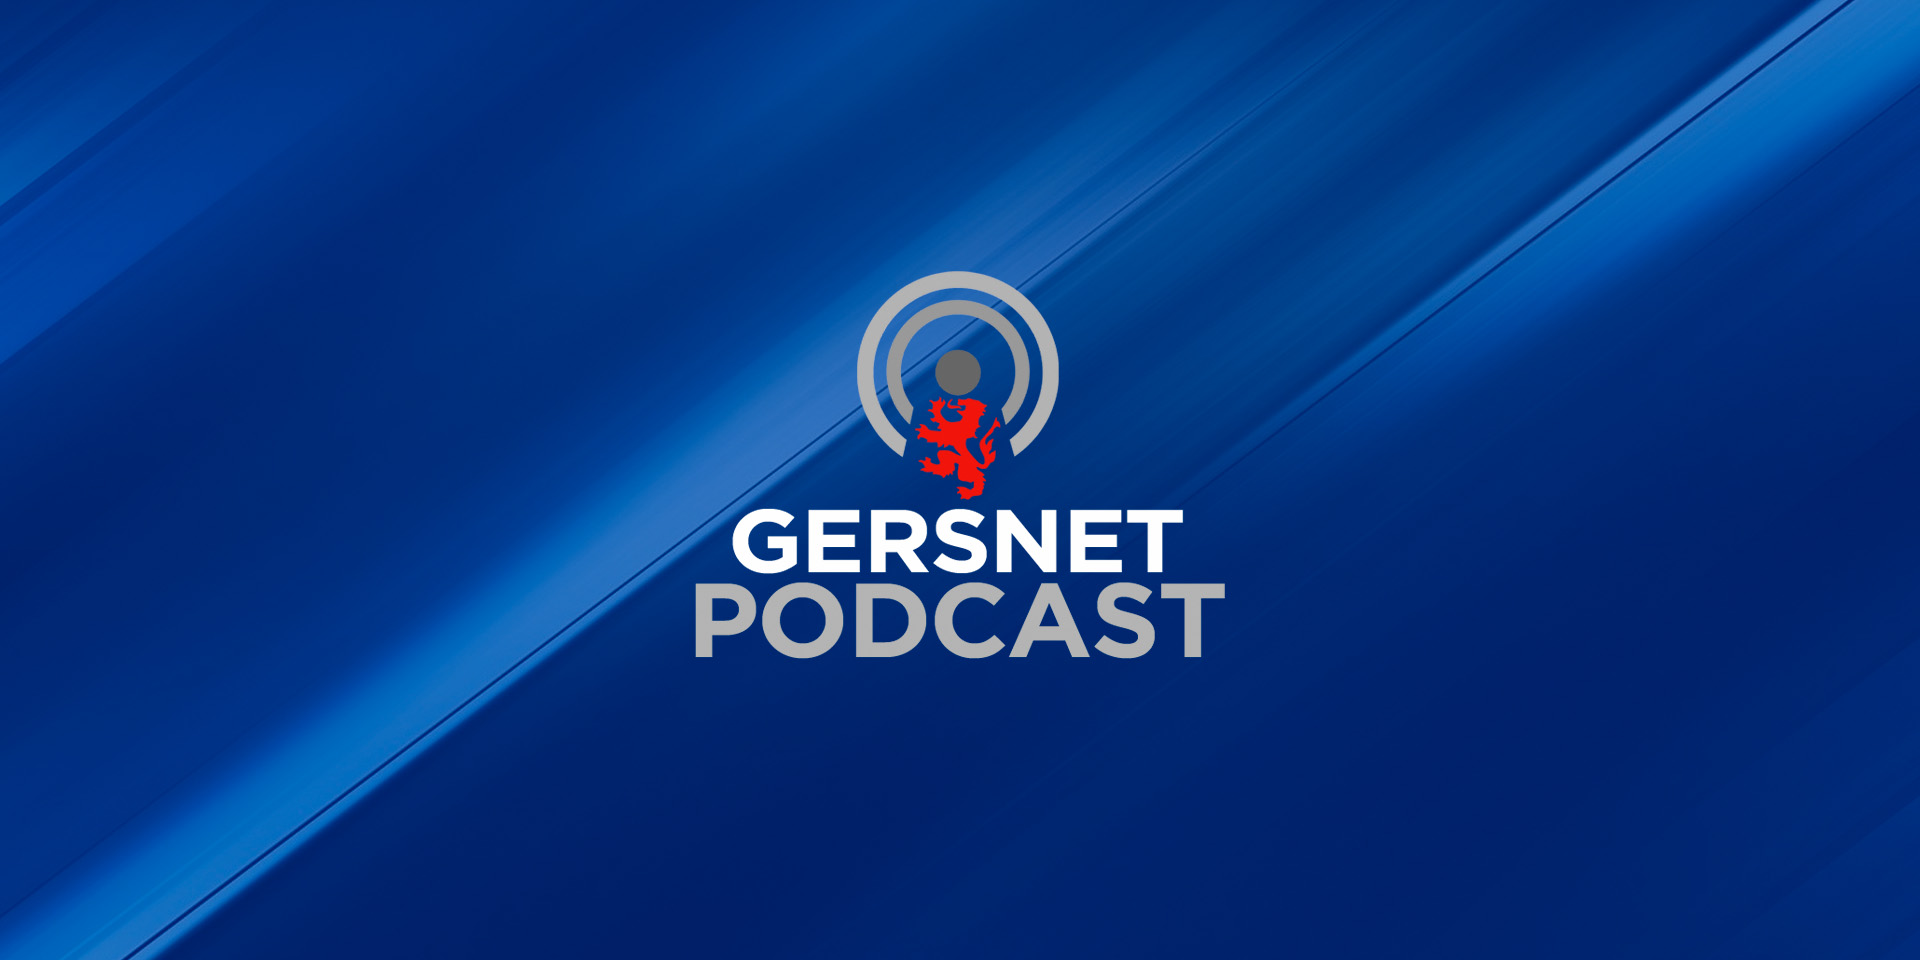 Gersnet Podcast 214 - Going, going, gone?